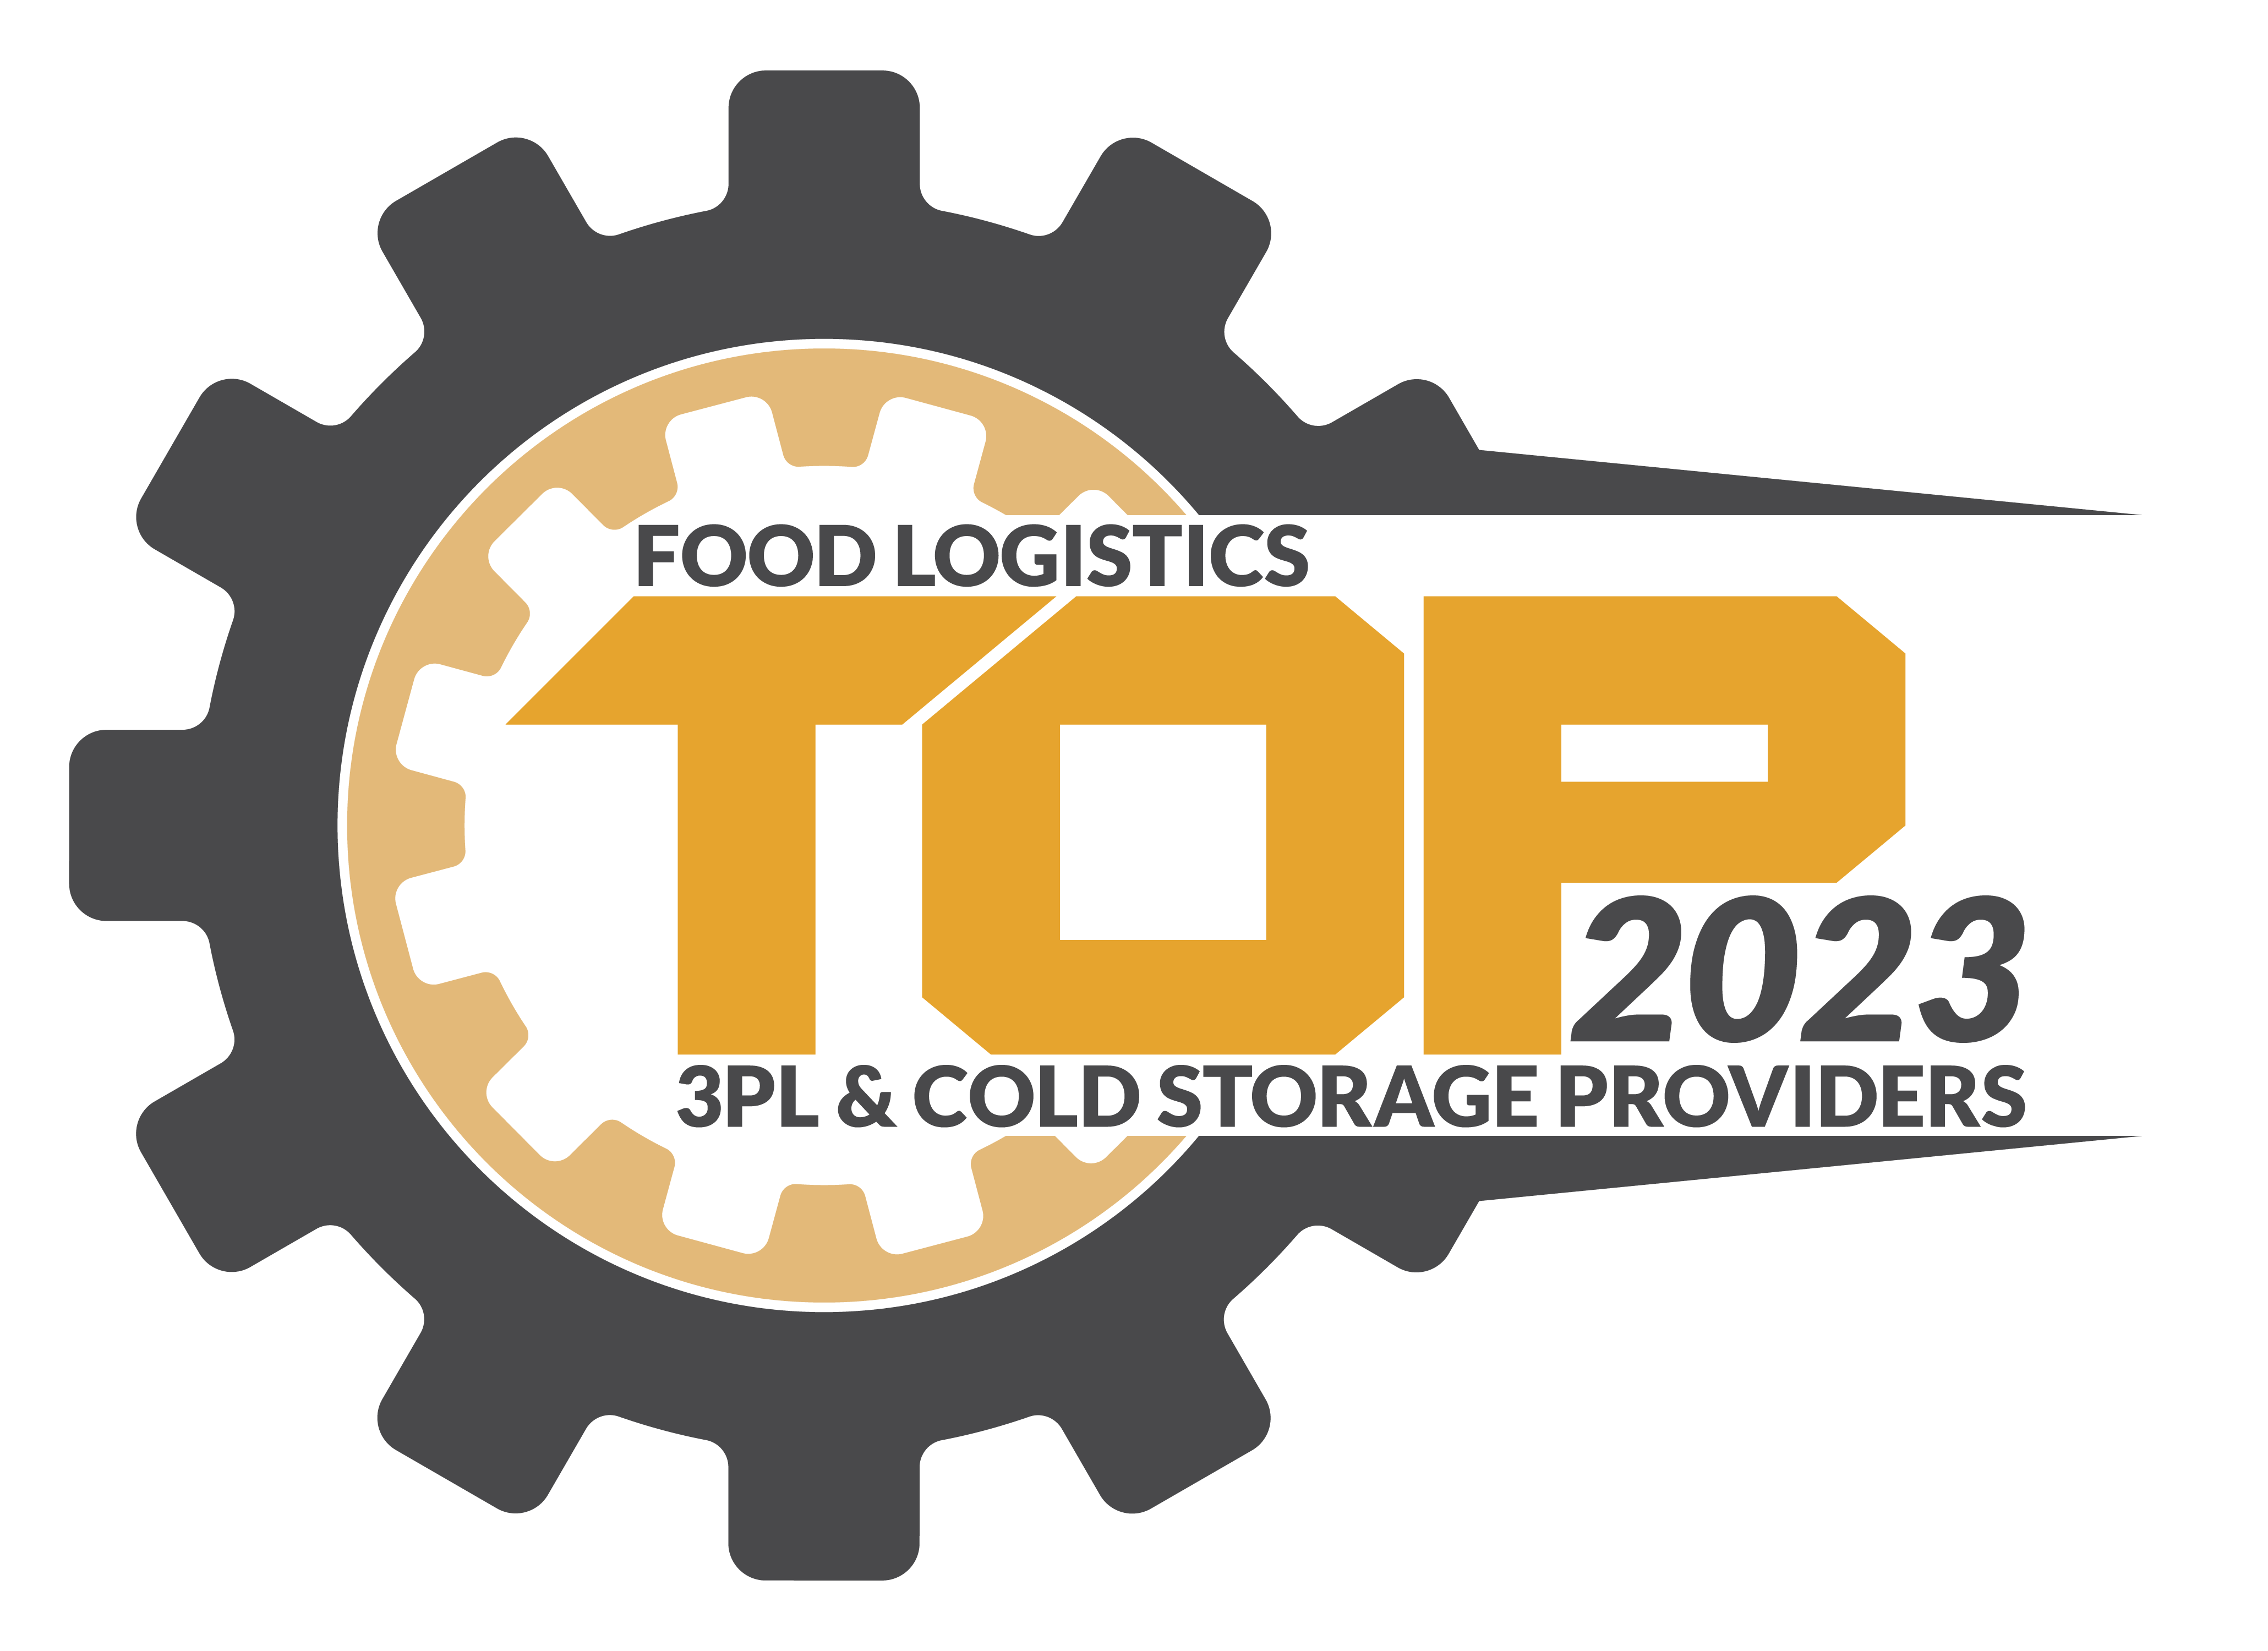 Award Logo for Food Logistics Top 3PL and Cold Storage Providers.